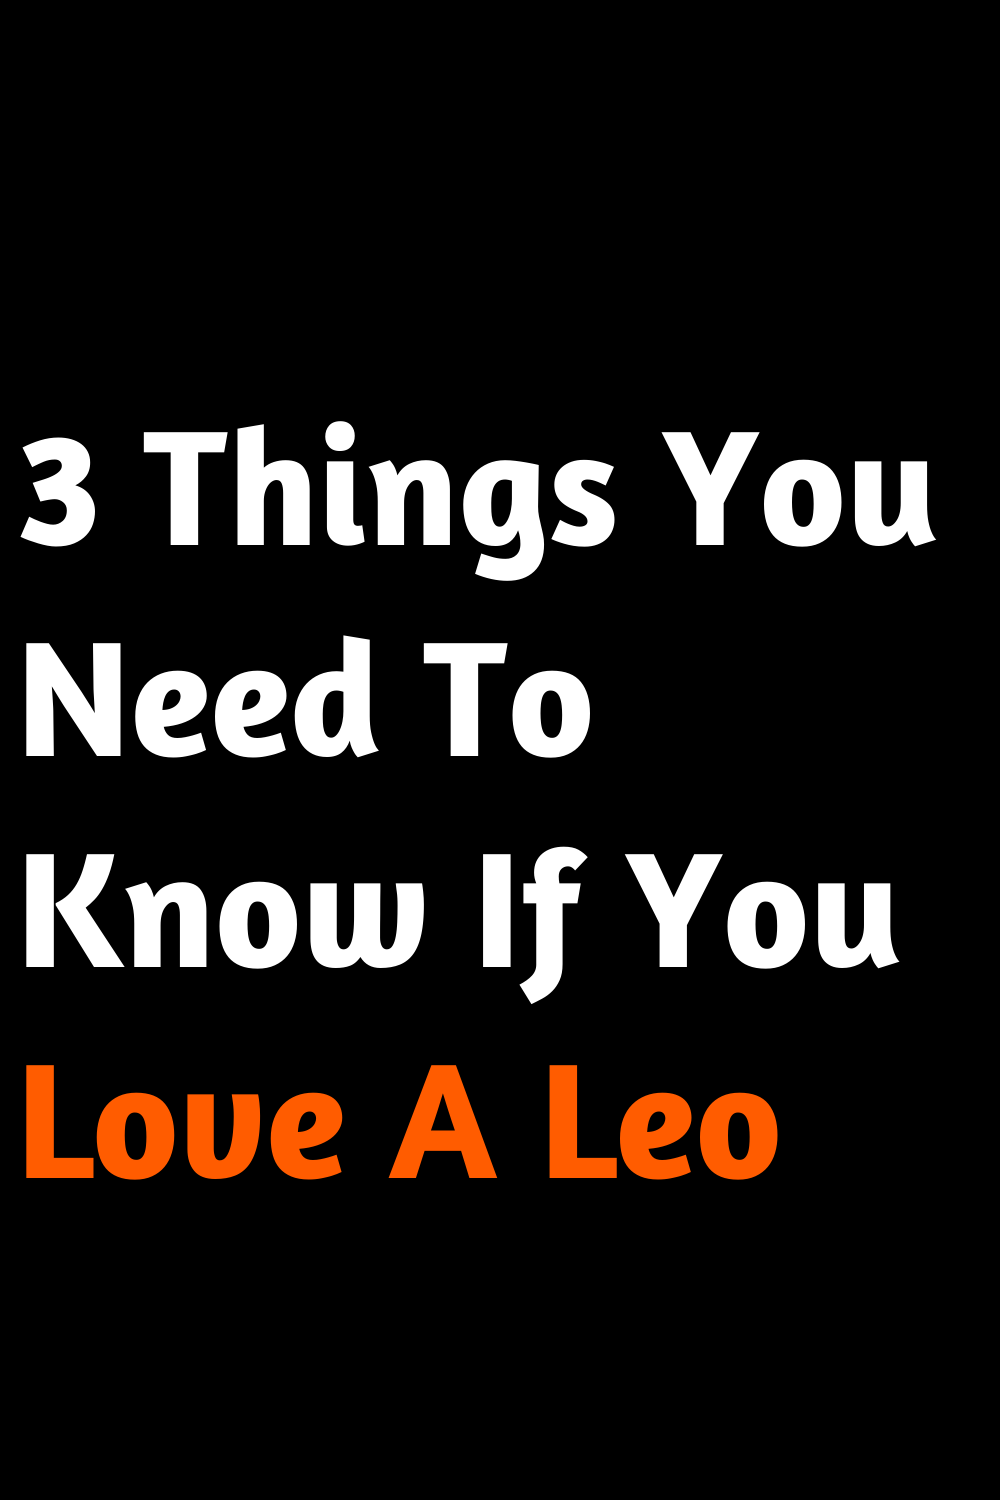 3 Things You Need To Know If You Love A Leo